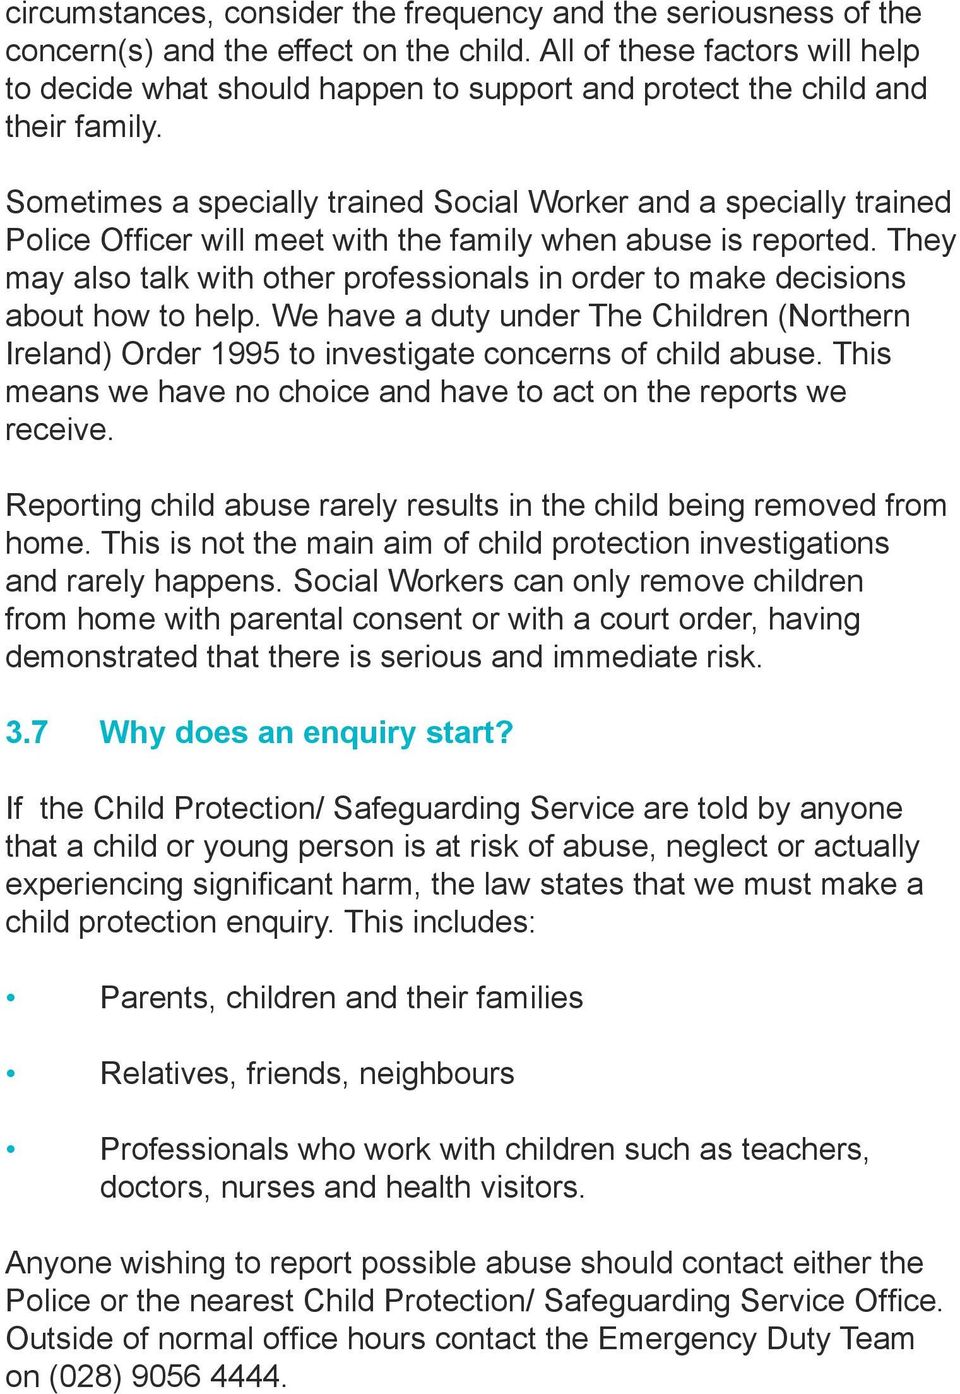 Sometimes a specially trained Social Worker and a specially trained Police Officer will meet with the family when abuse is reported.